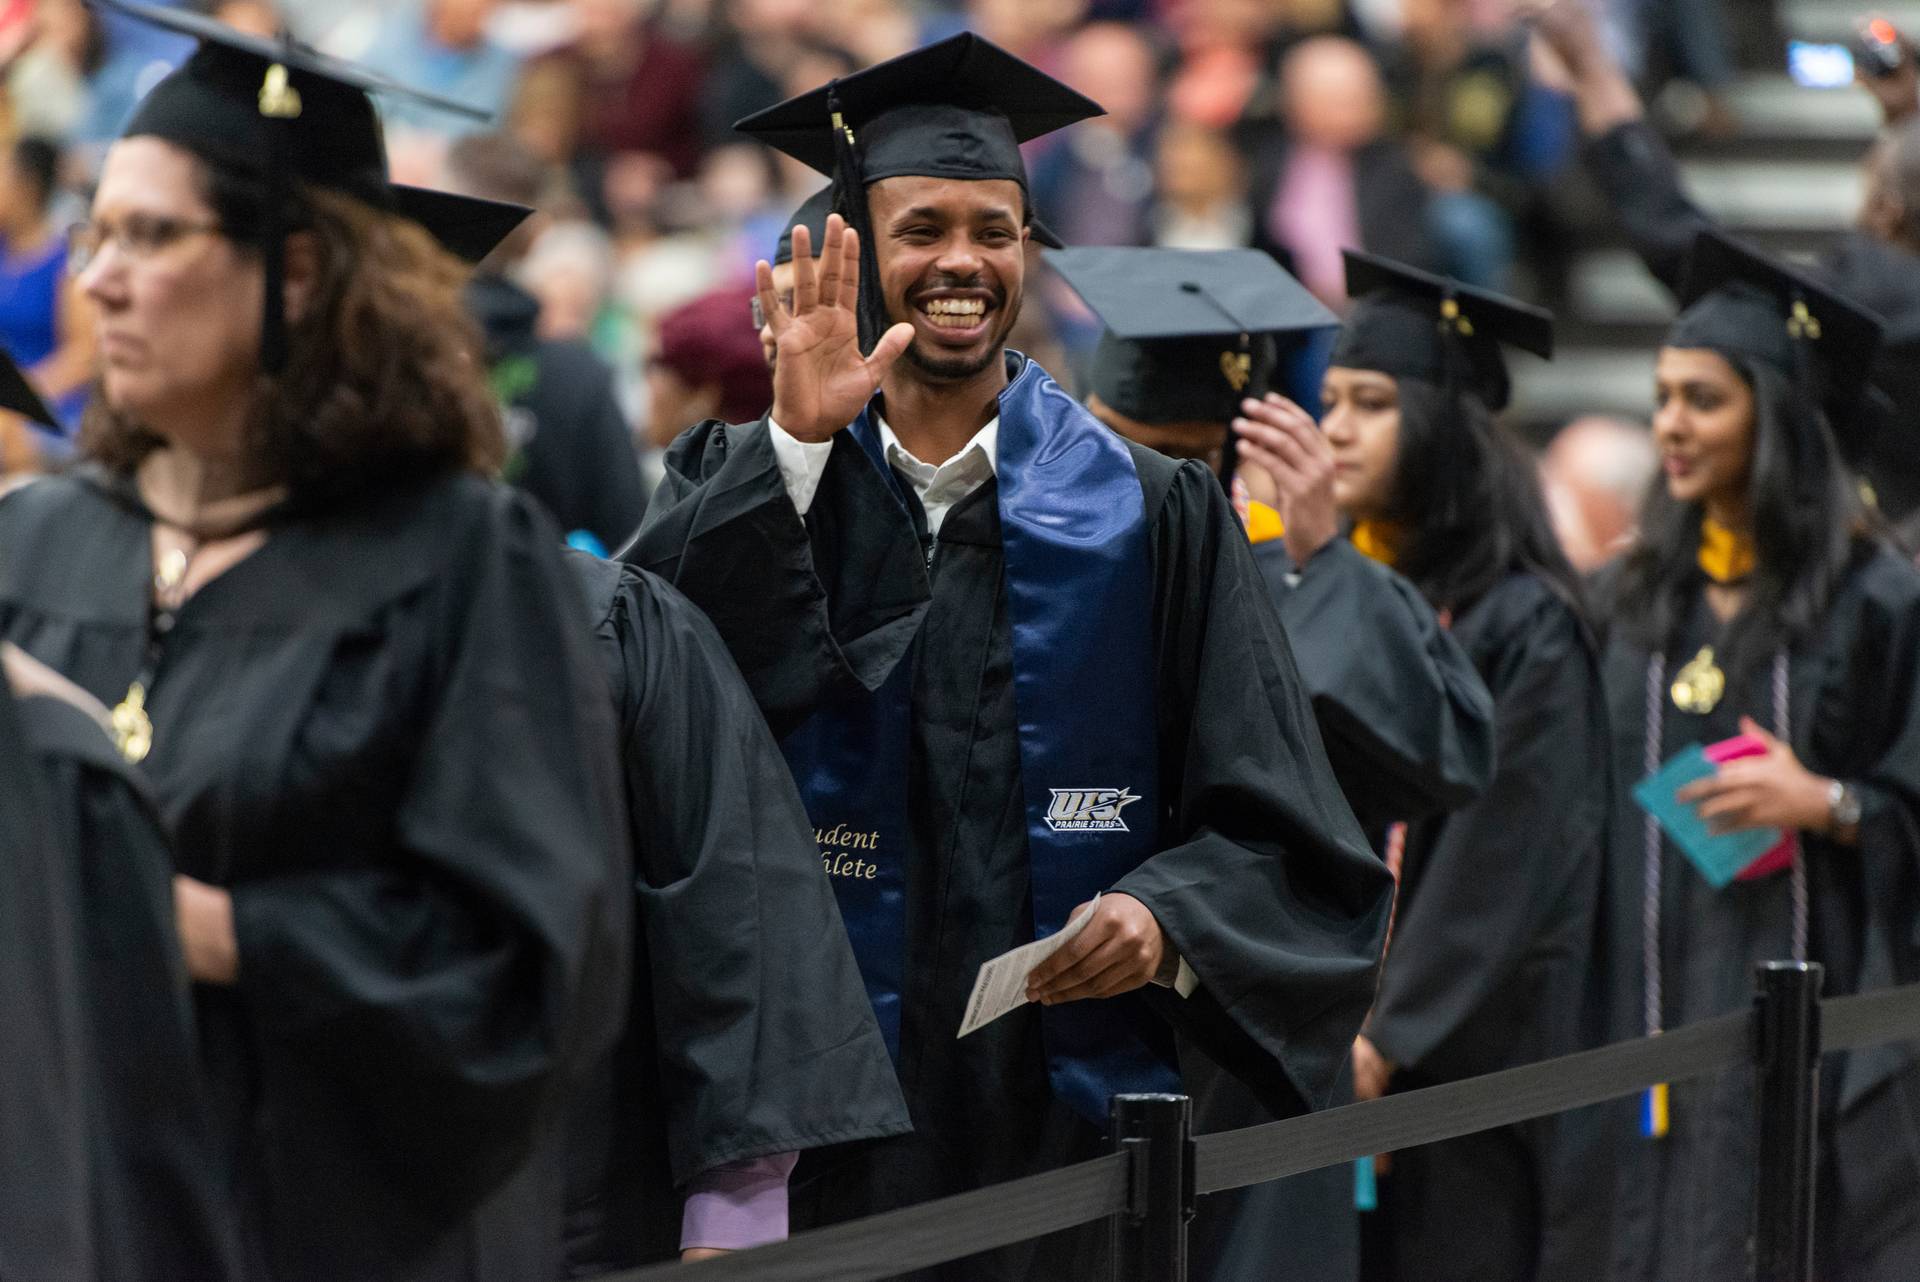 Graduate waves and smiles while standing in a line of other graduates